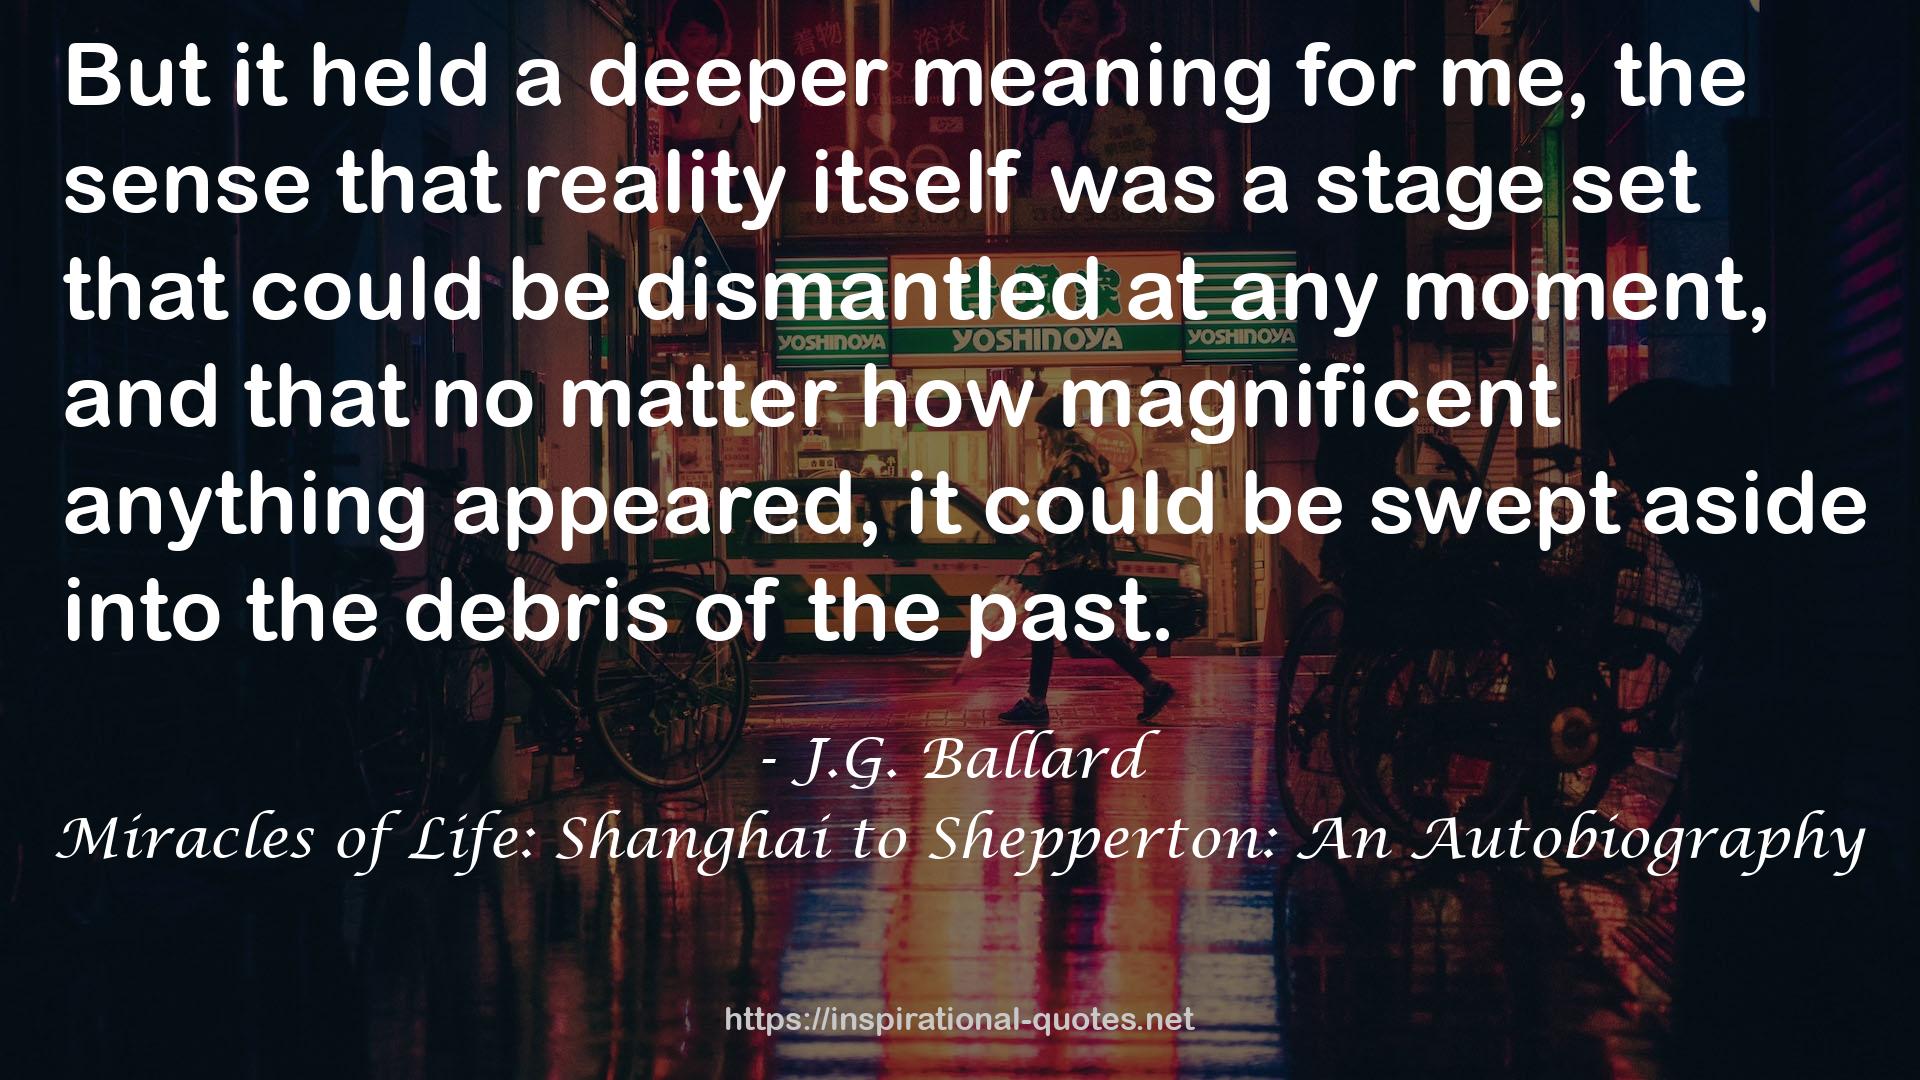 Miracles of Life: Shanghai to Shepperton: An Autobiography QUOTES